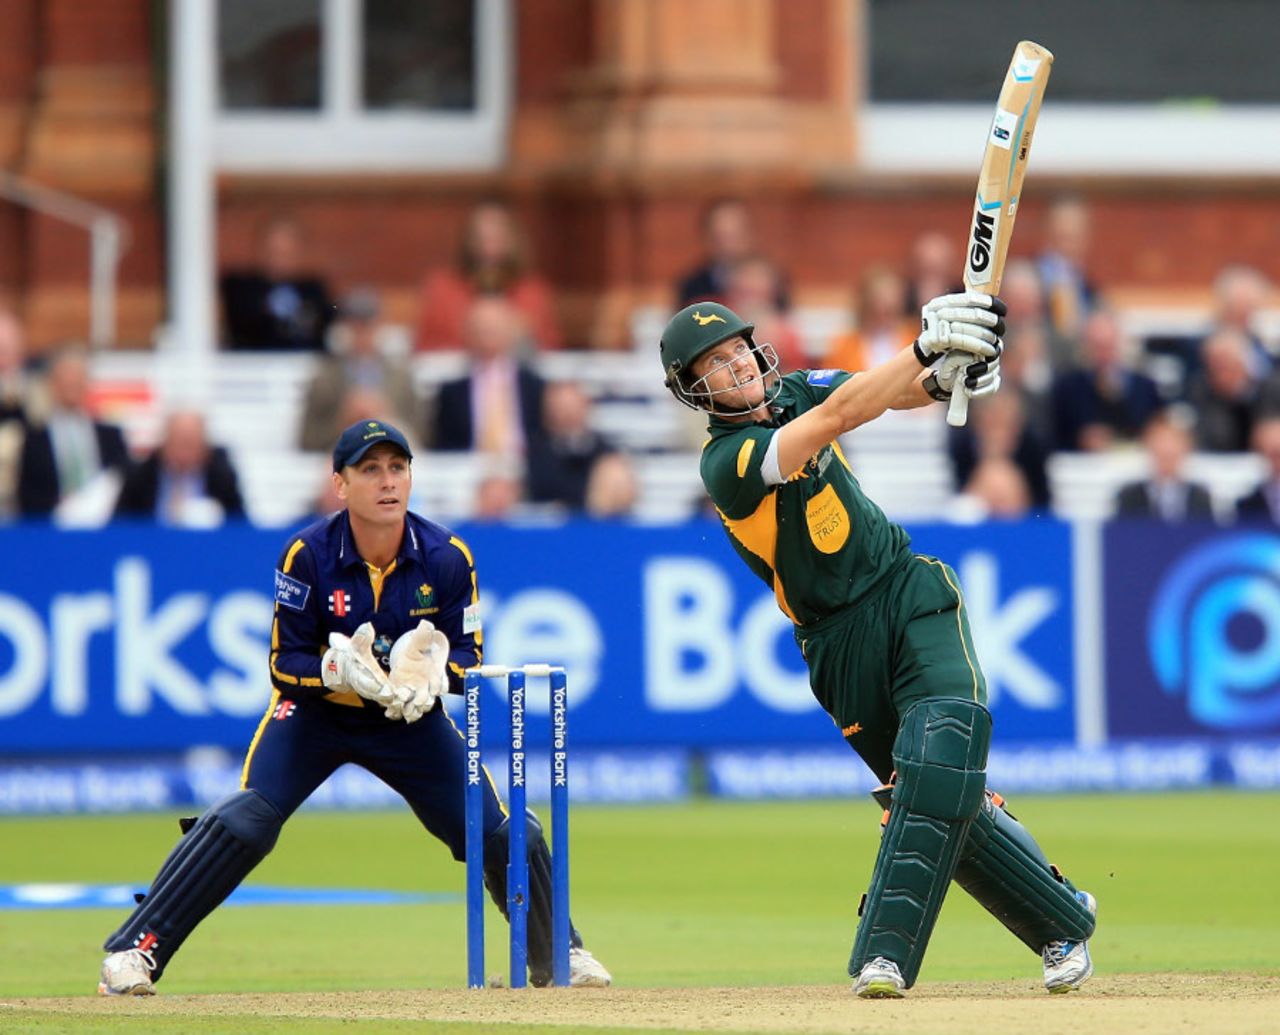 Chris Read goes over the leg side as he helps Nottinghamshire recover, Glamorgan v Nottinghamshire, YB40 final, Lord's, September 21, 2013